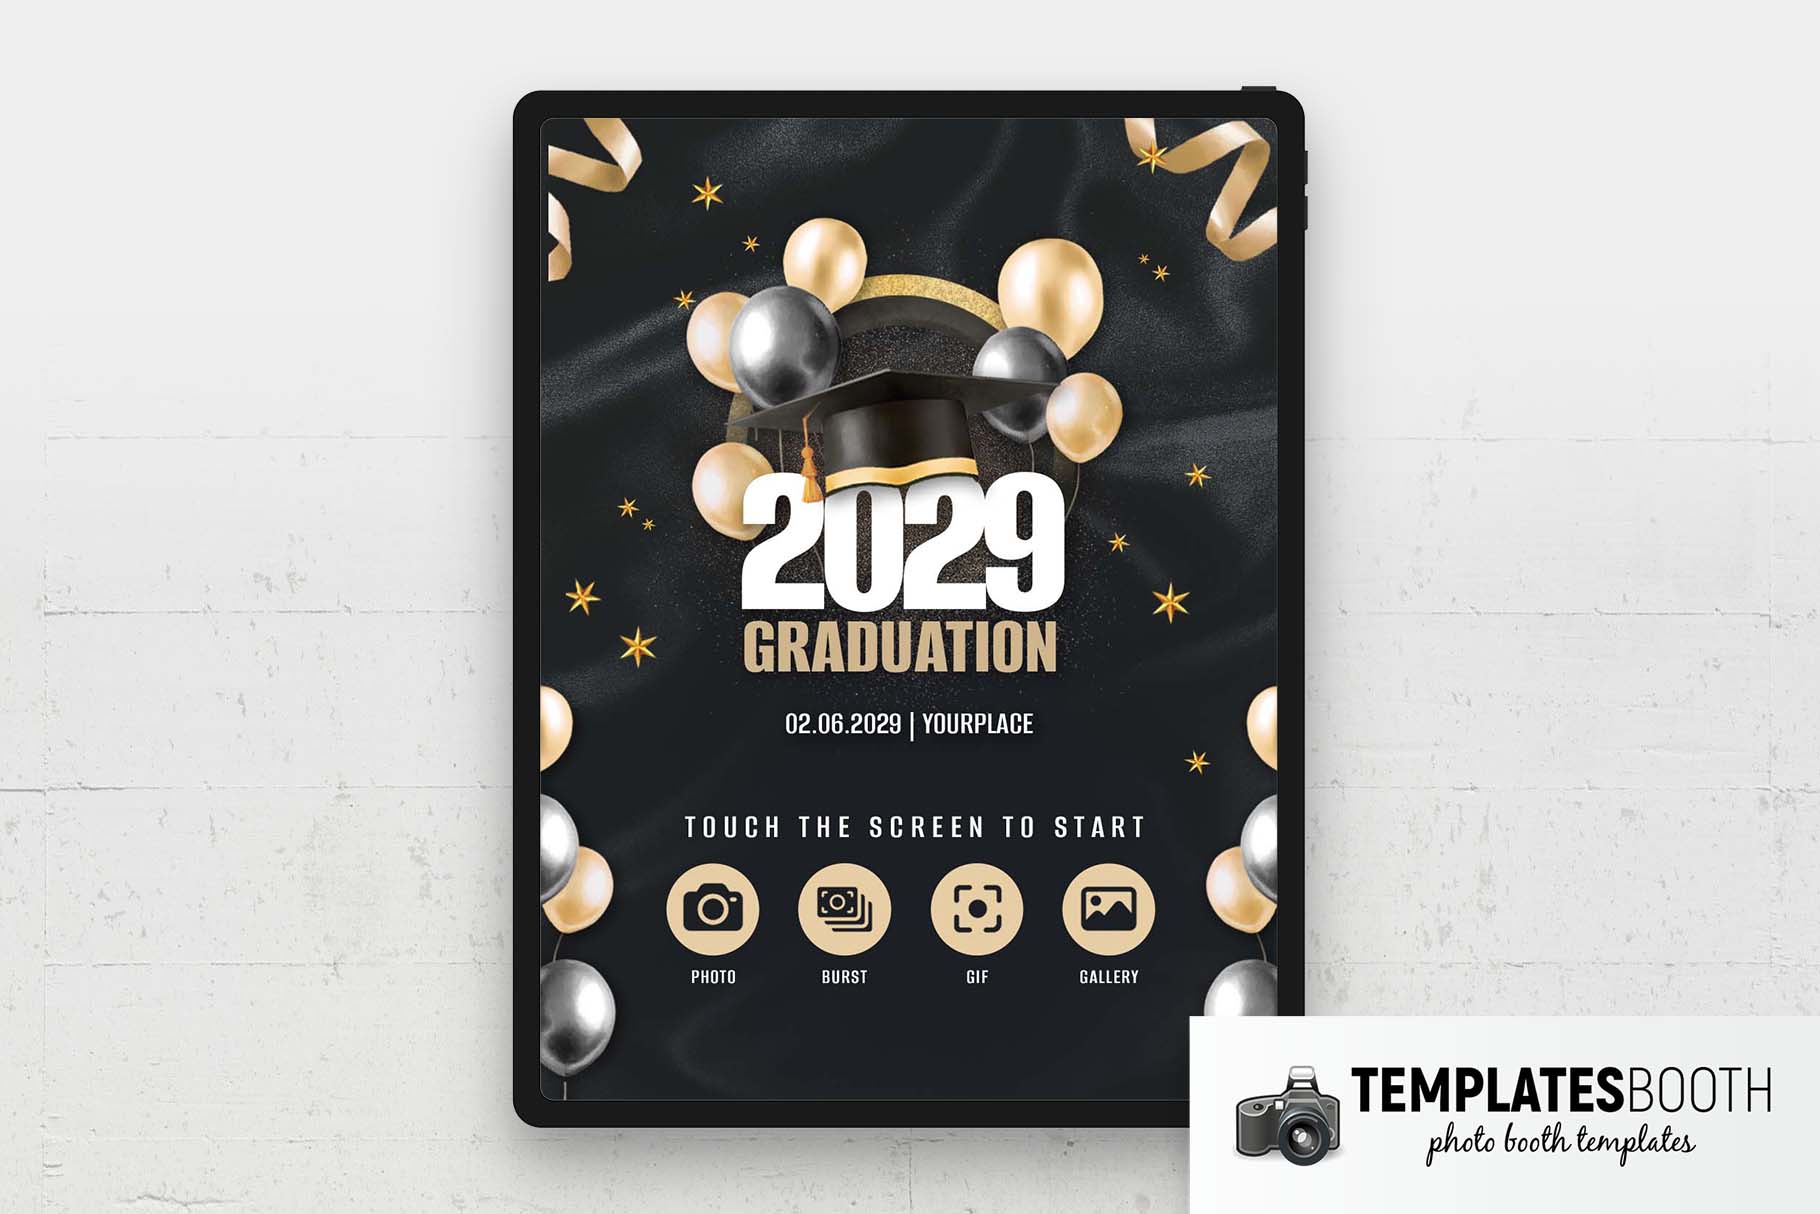 Graduation Photo Booth Welcome Screen